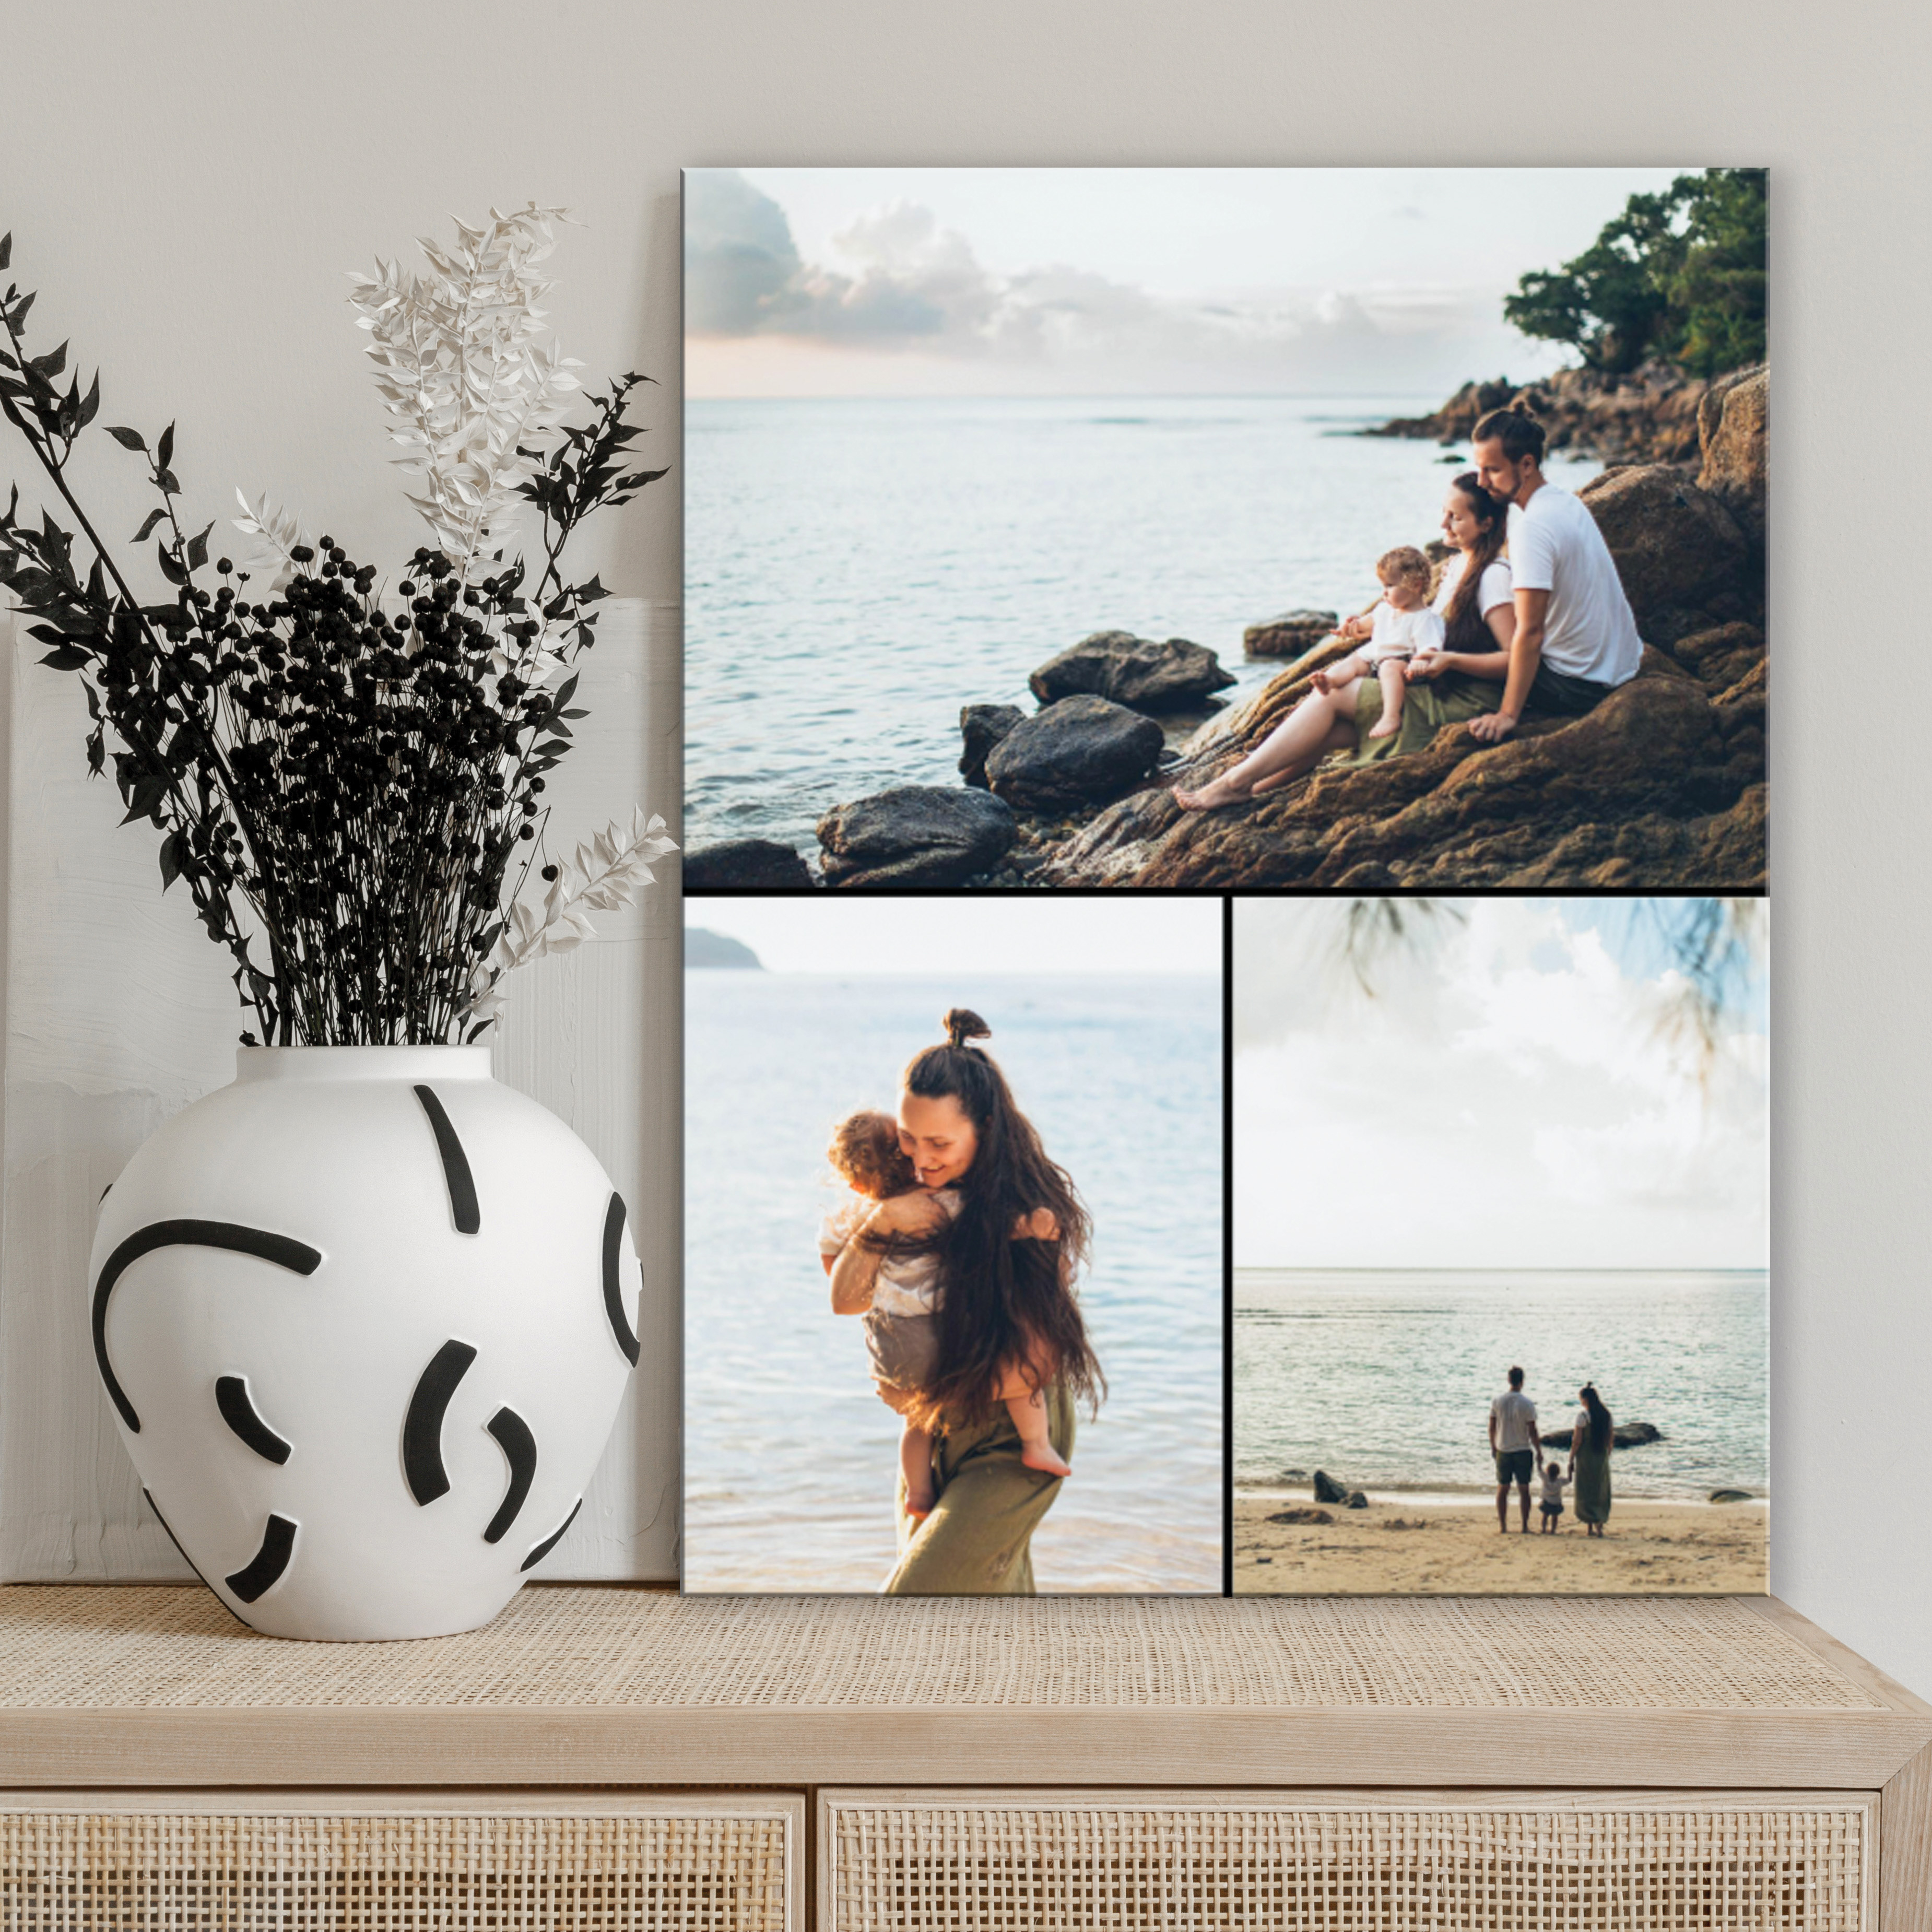 Get 55% off Photo collages